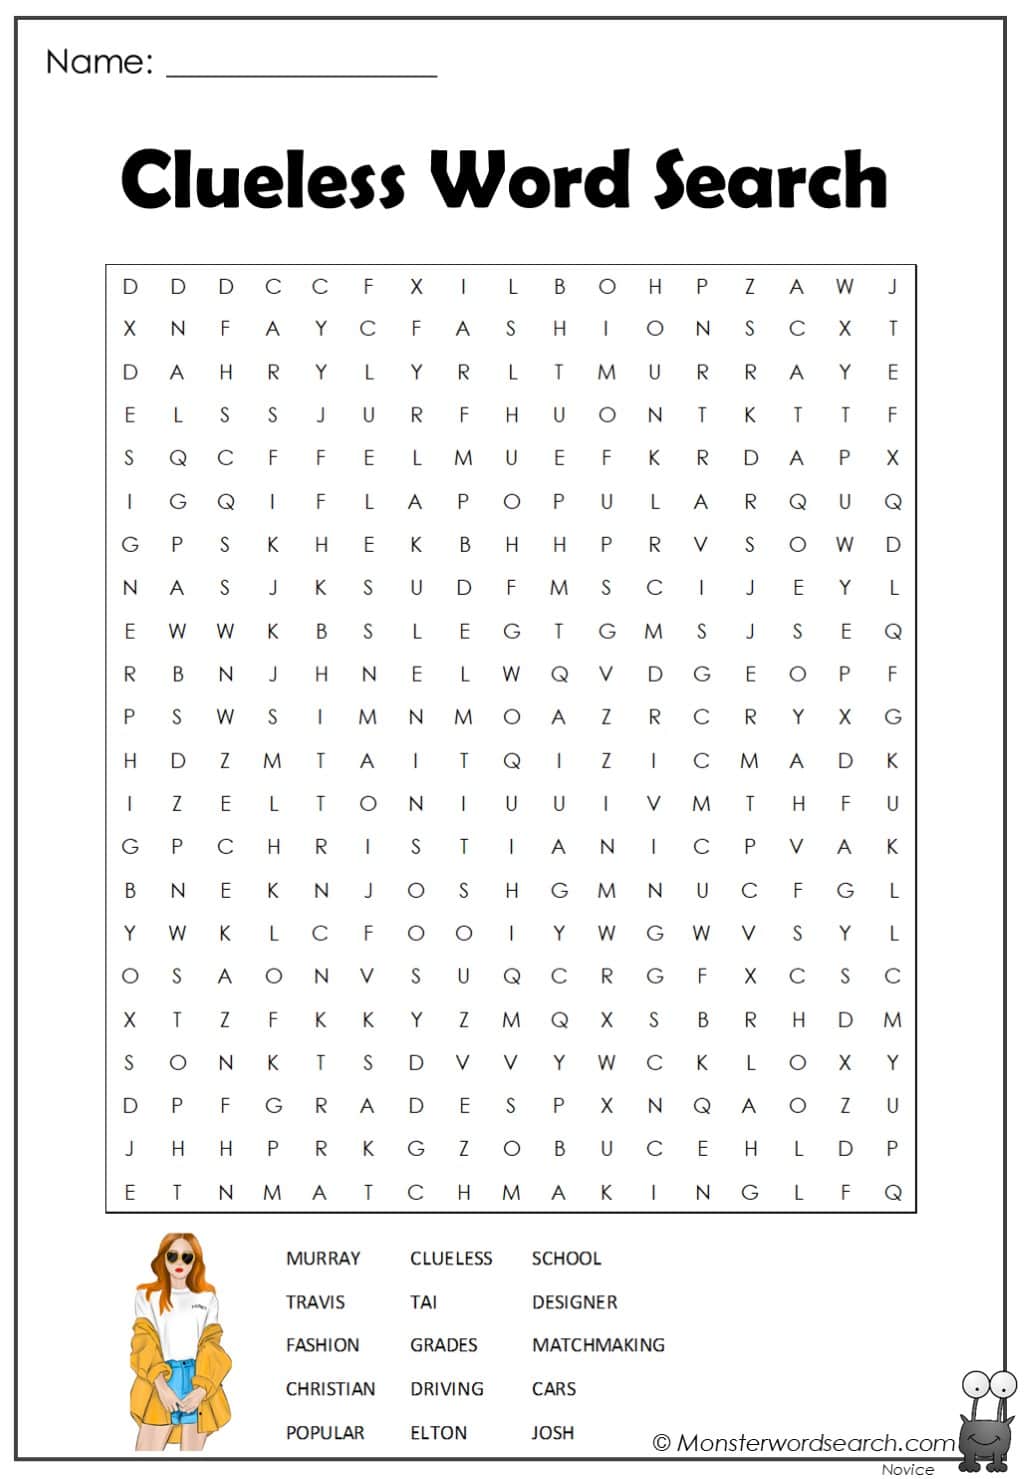 Clueless Word Search